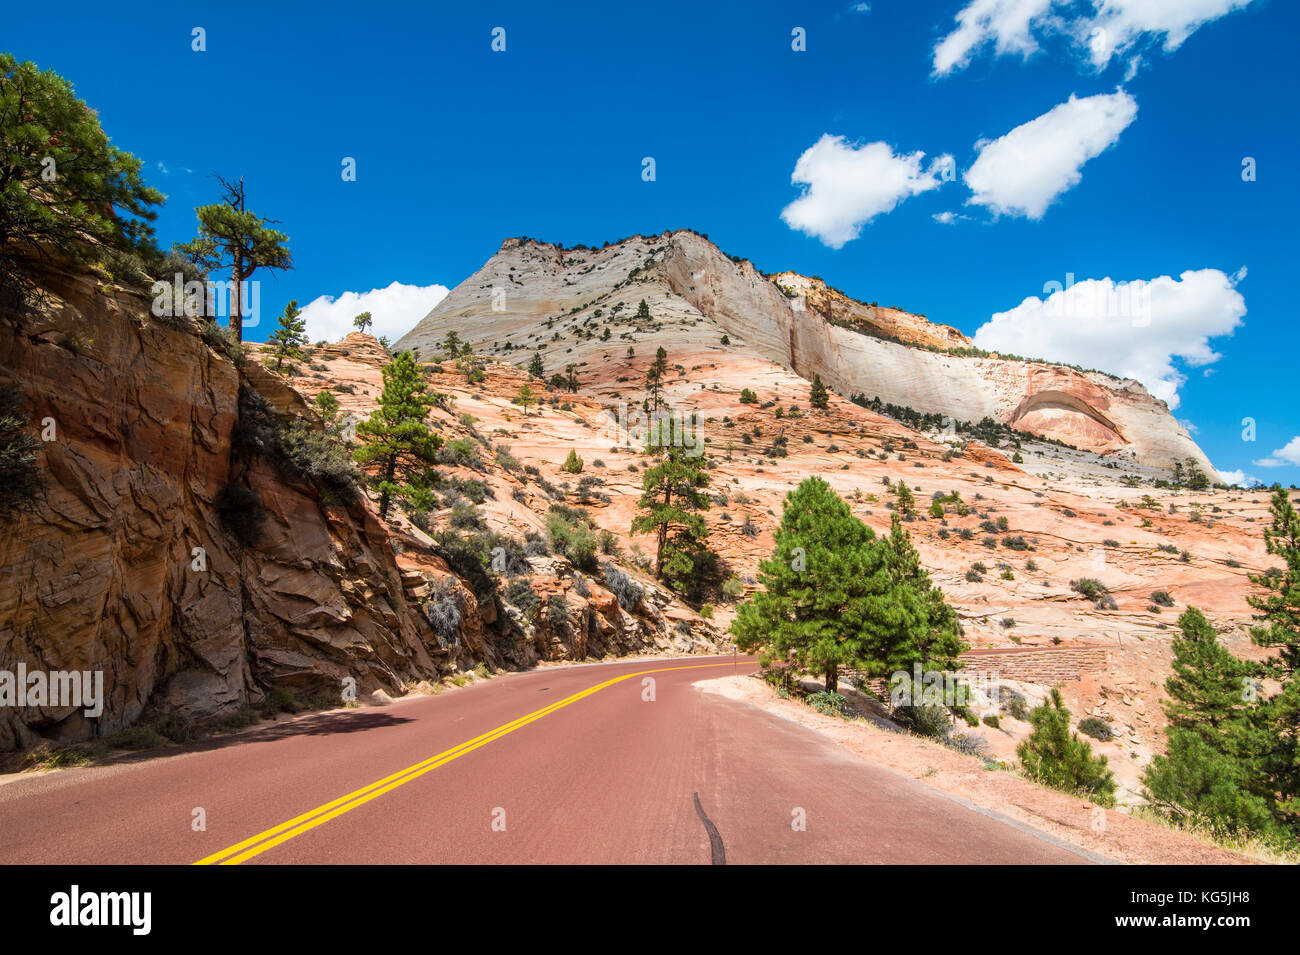 Road leading through the Zion National Park, Utah, USA Stock Photo